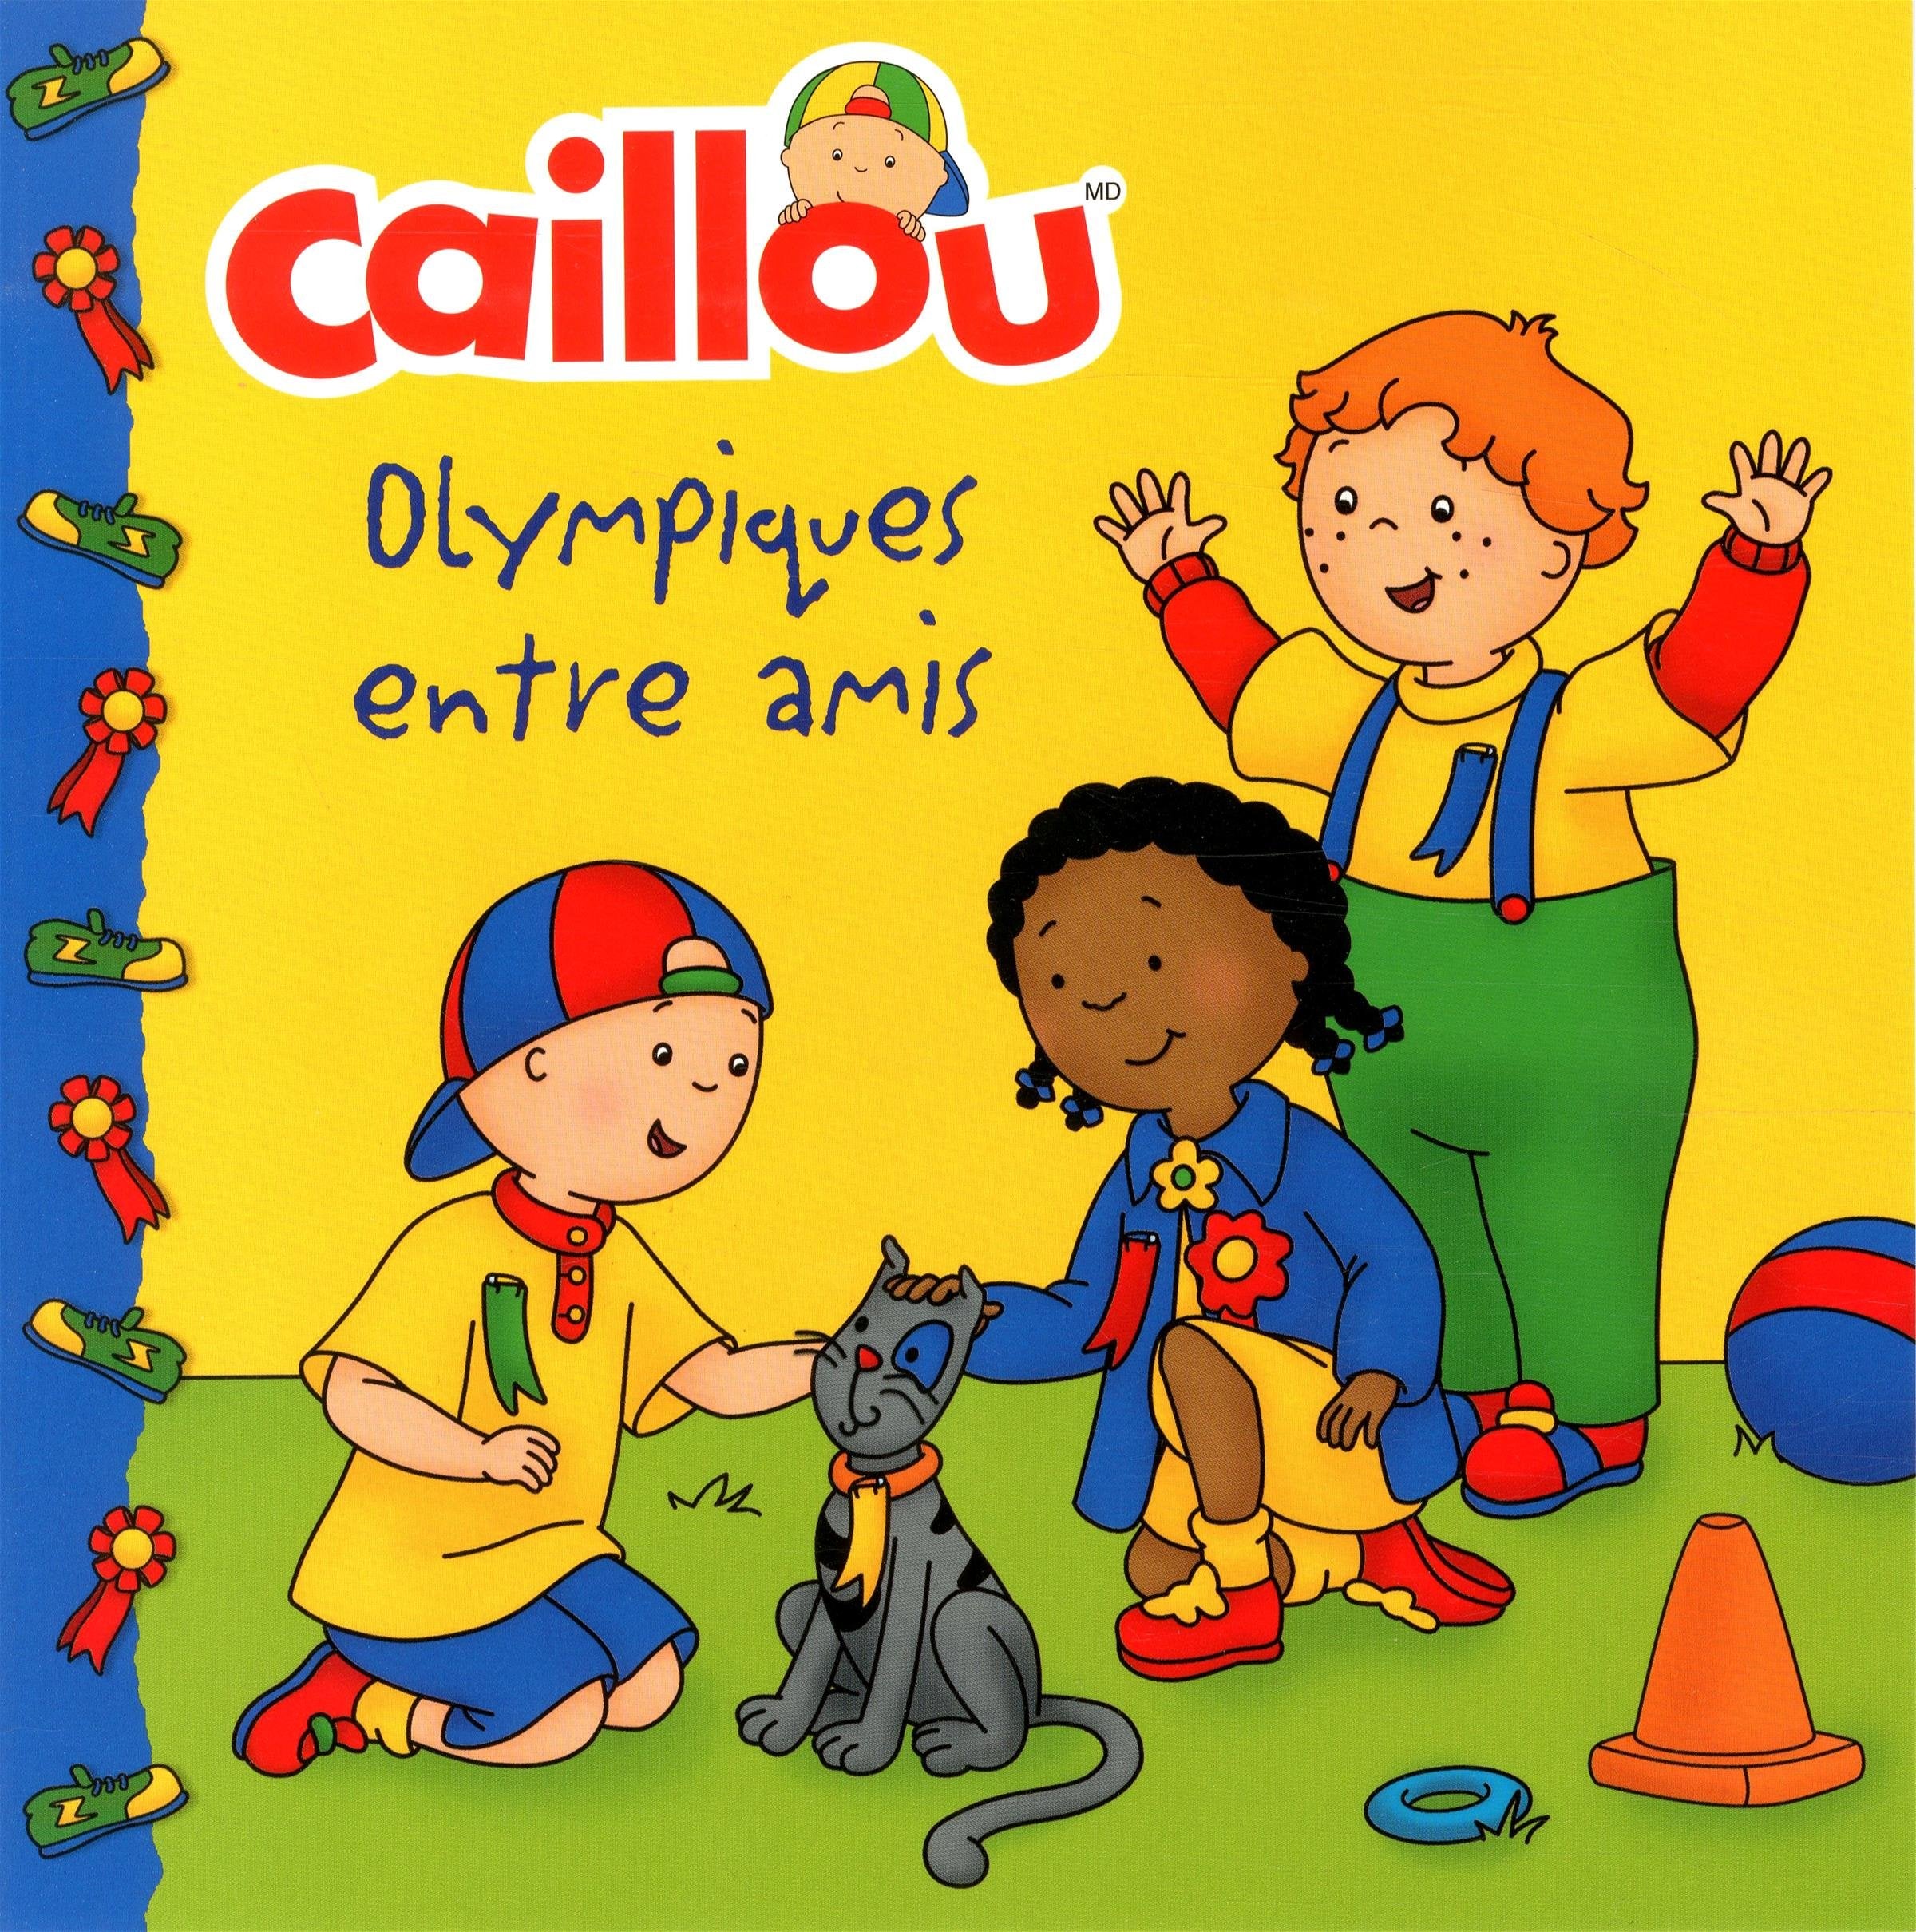 Caillou : Olympiques entre amis